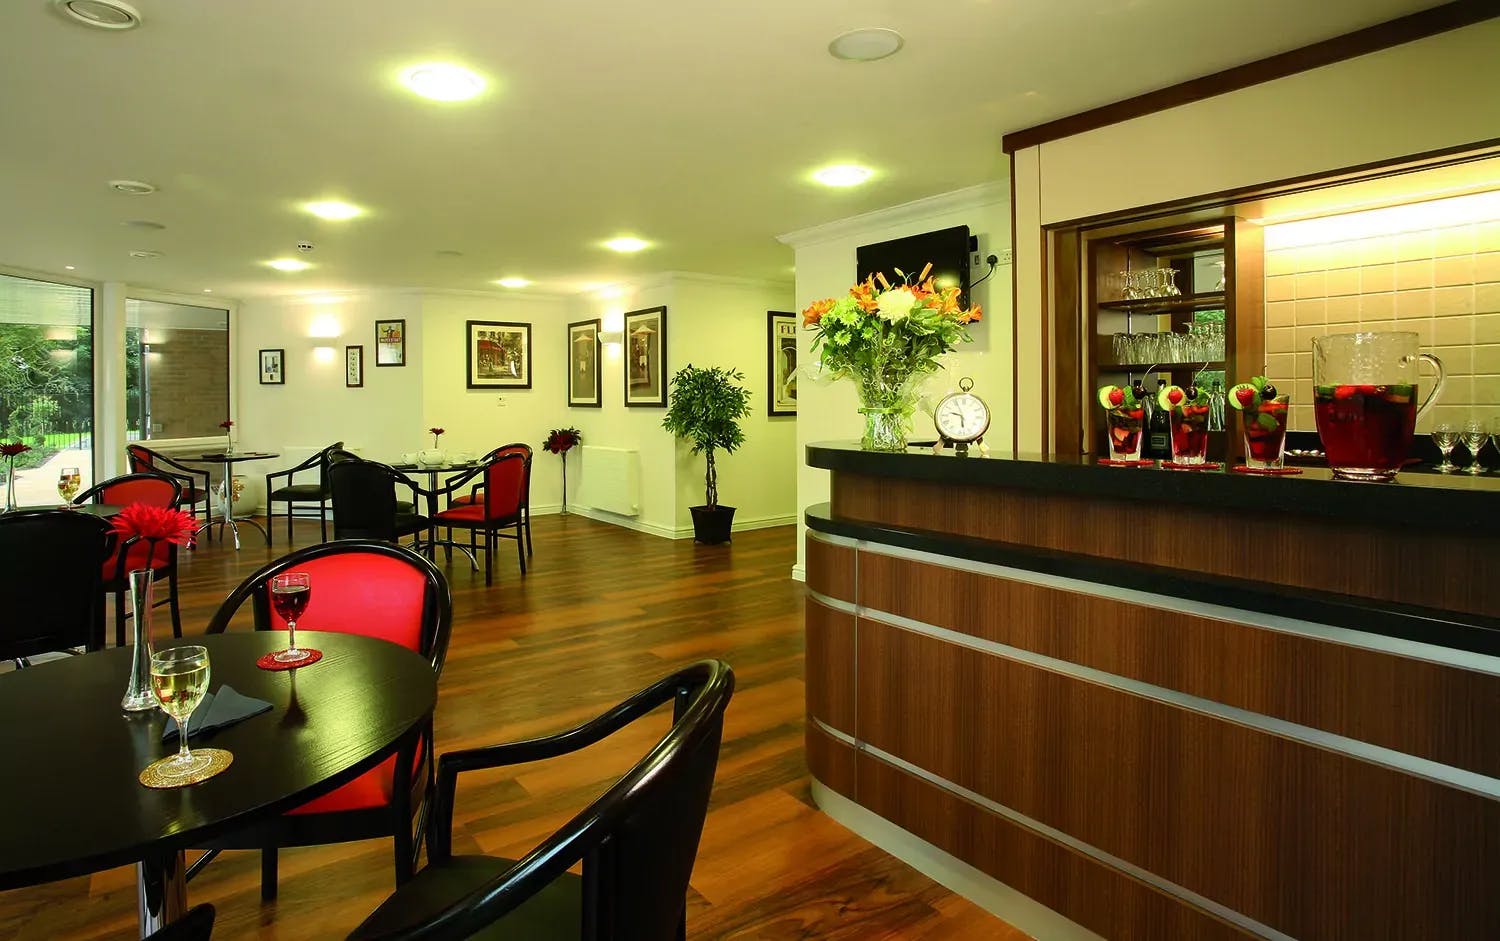 Dining Room at Alderwood Care Home in Colchester, Essex